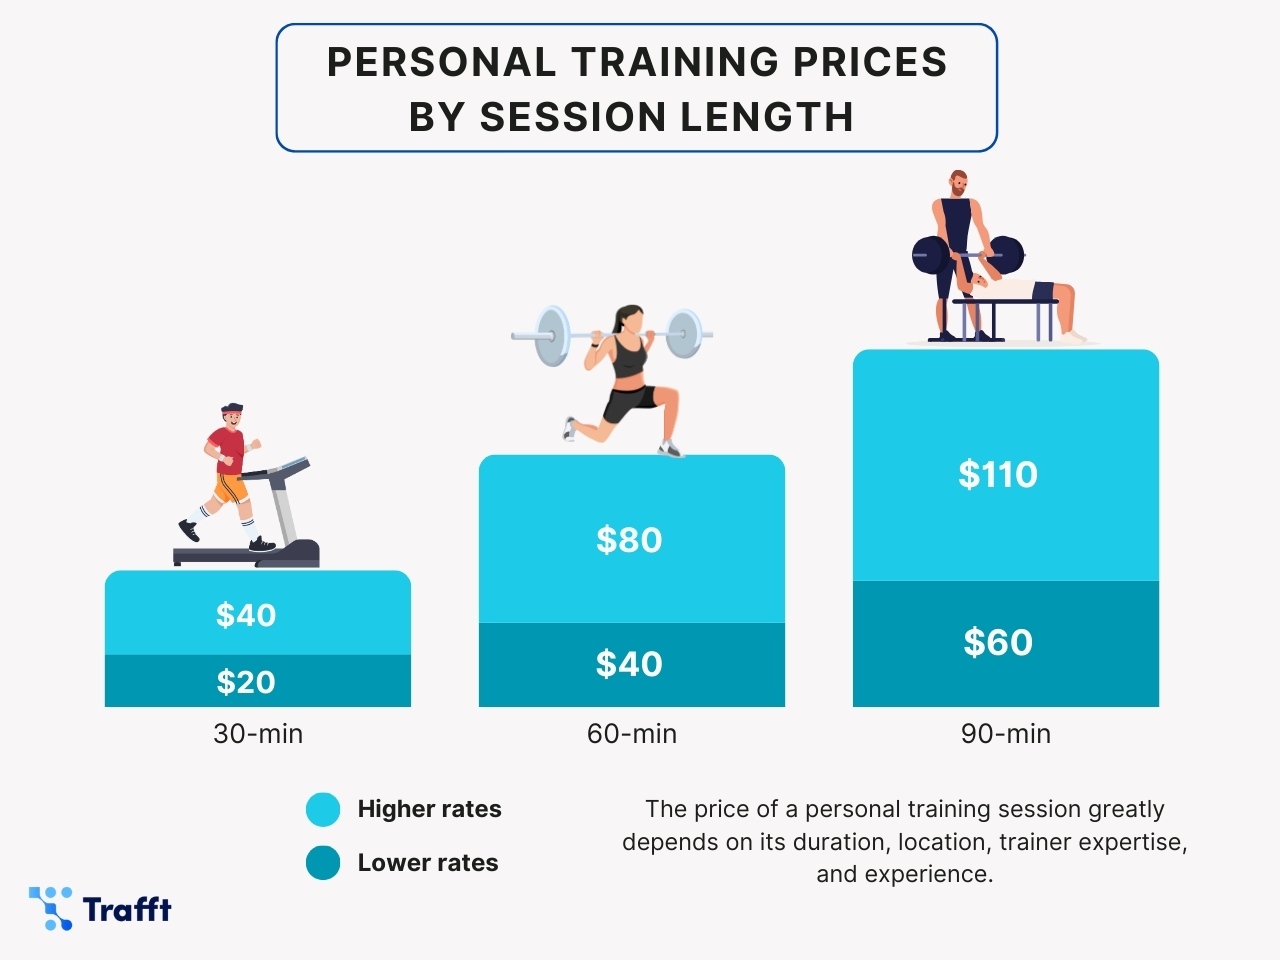 How much to charge for a personal training session depending on its length illustrated